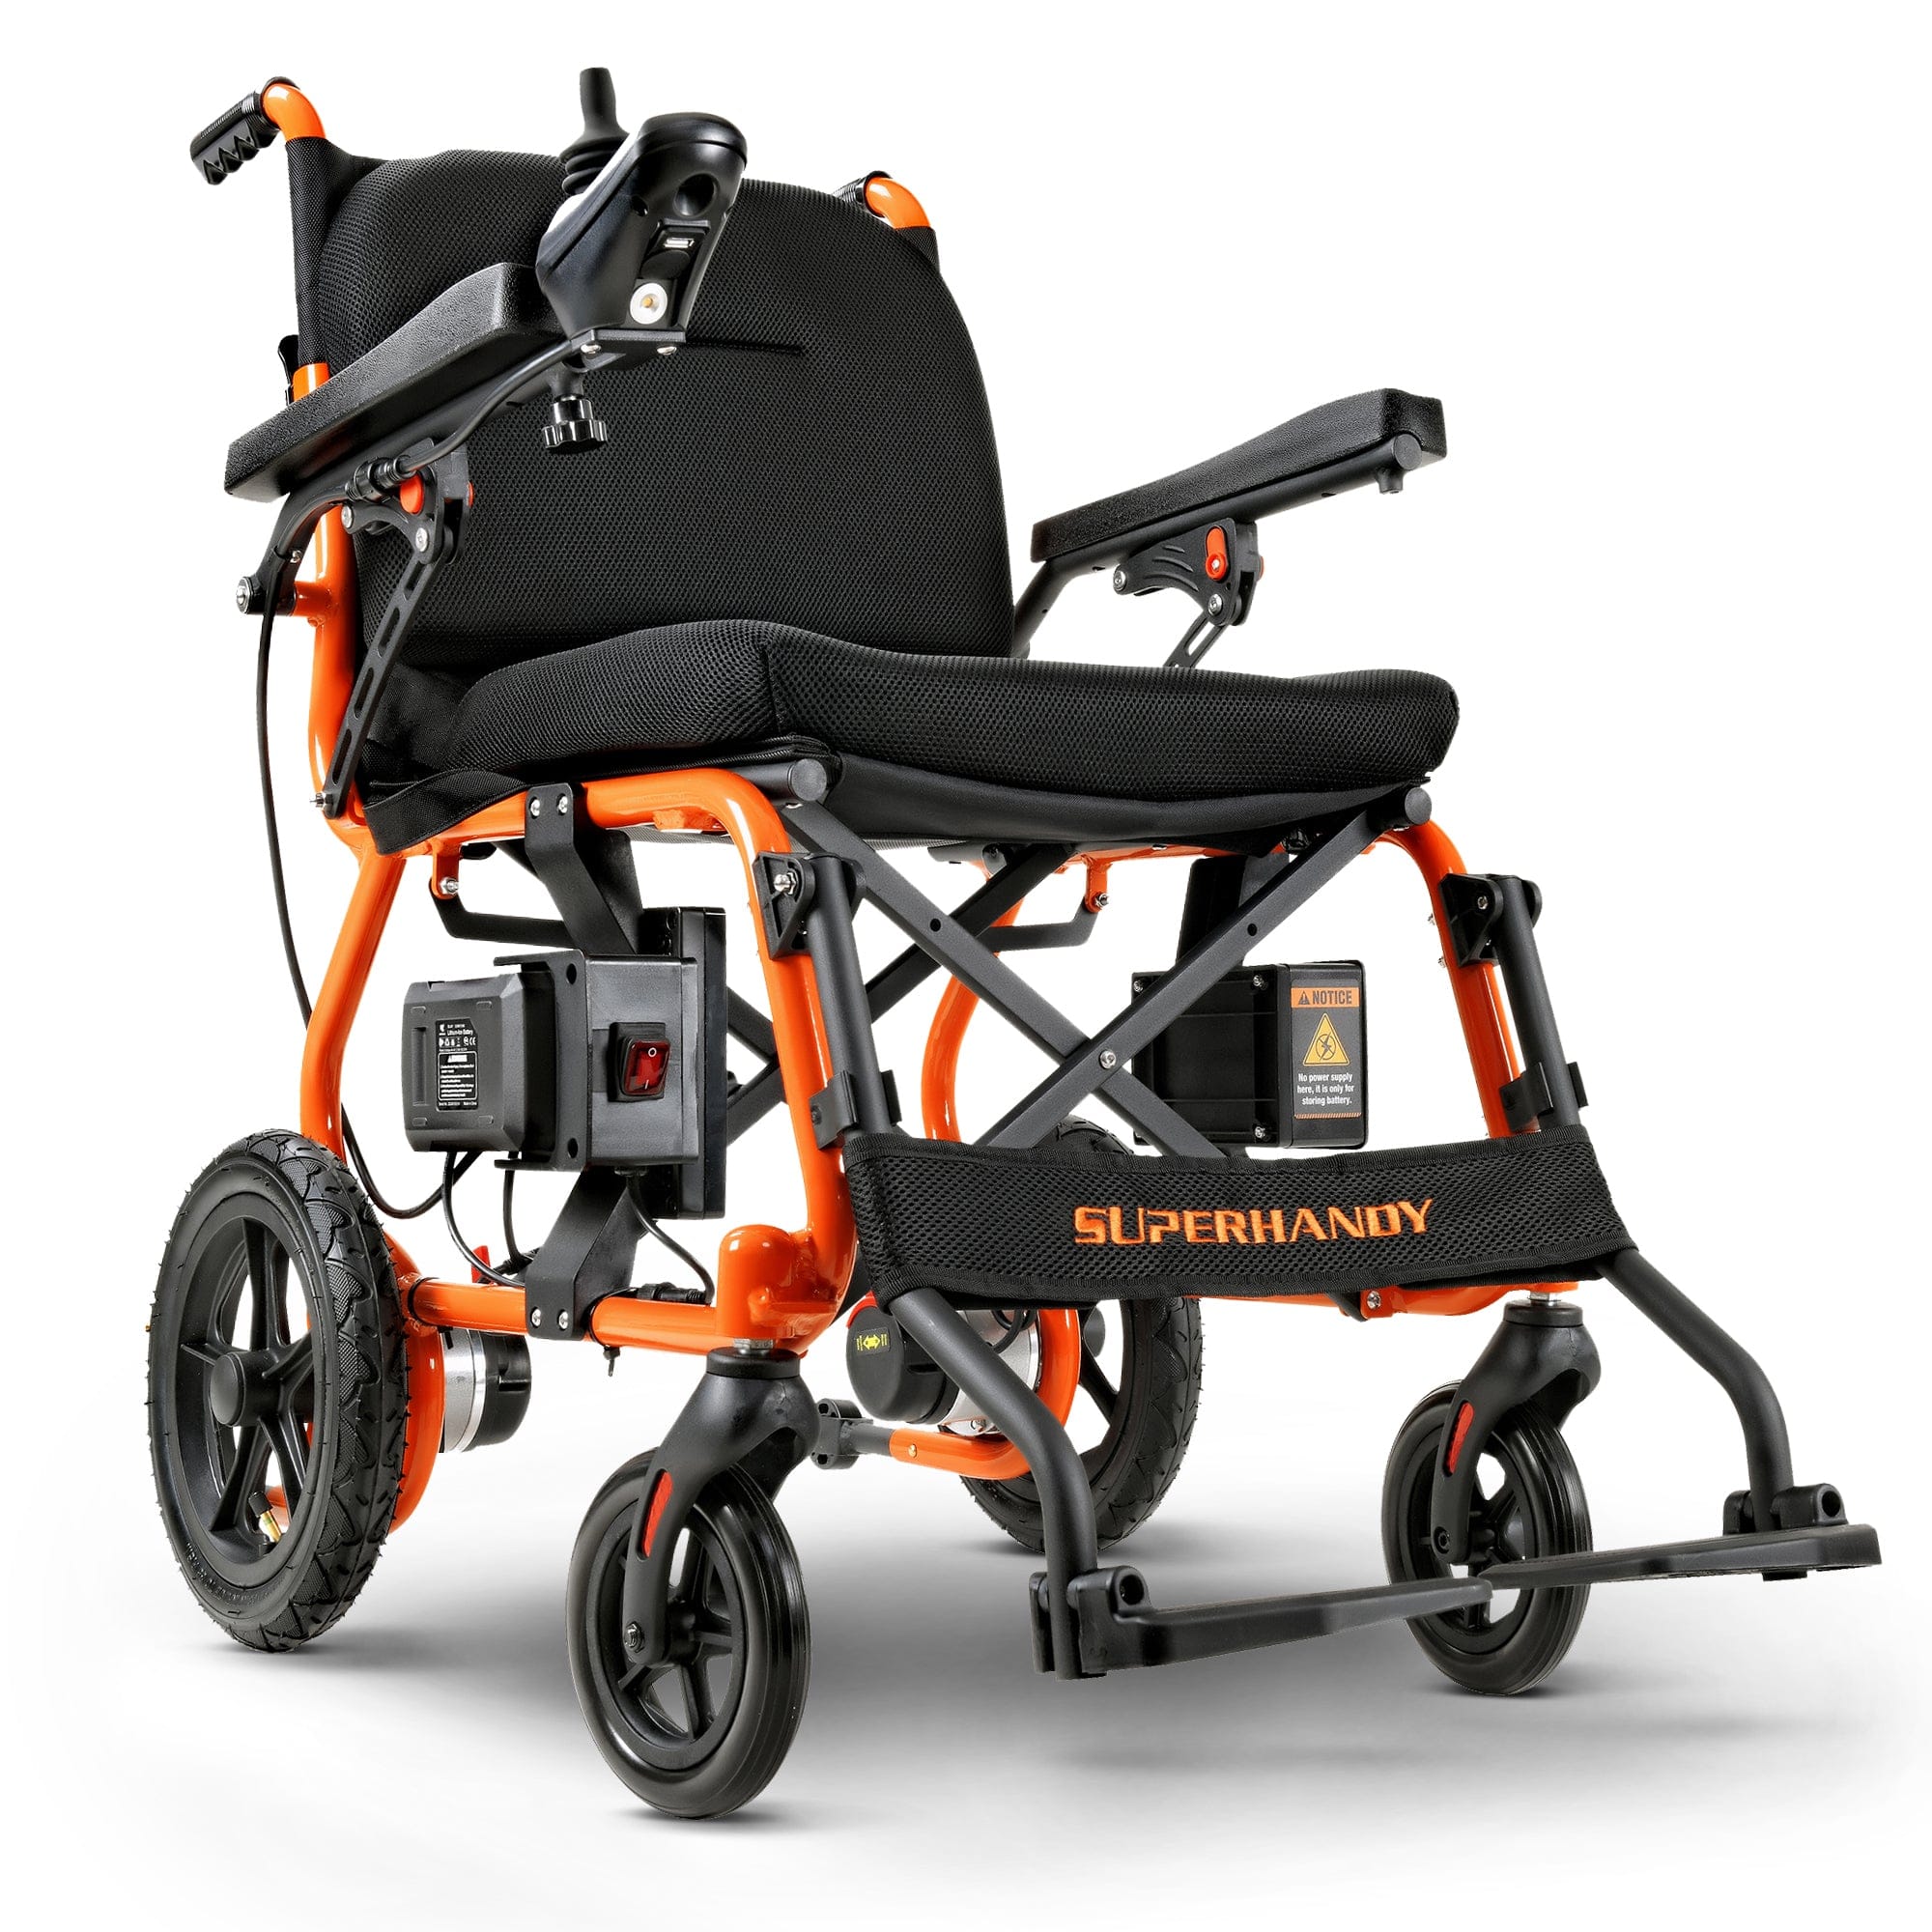 SuperHandy Electric Wheelchair Plus - Upgraded 48V 2Ah Battery, 330Lbs Max Weight